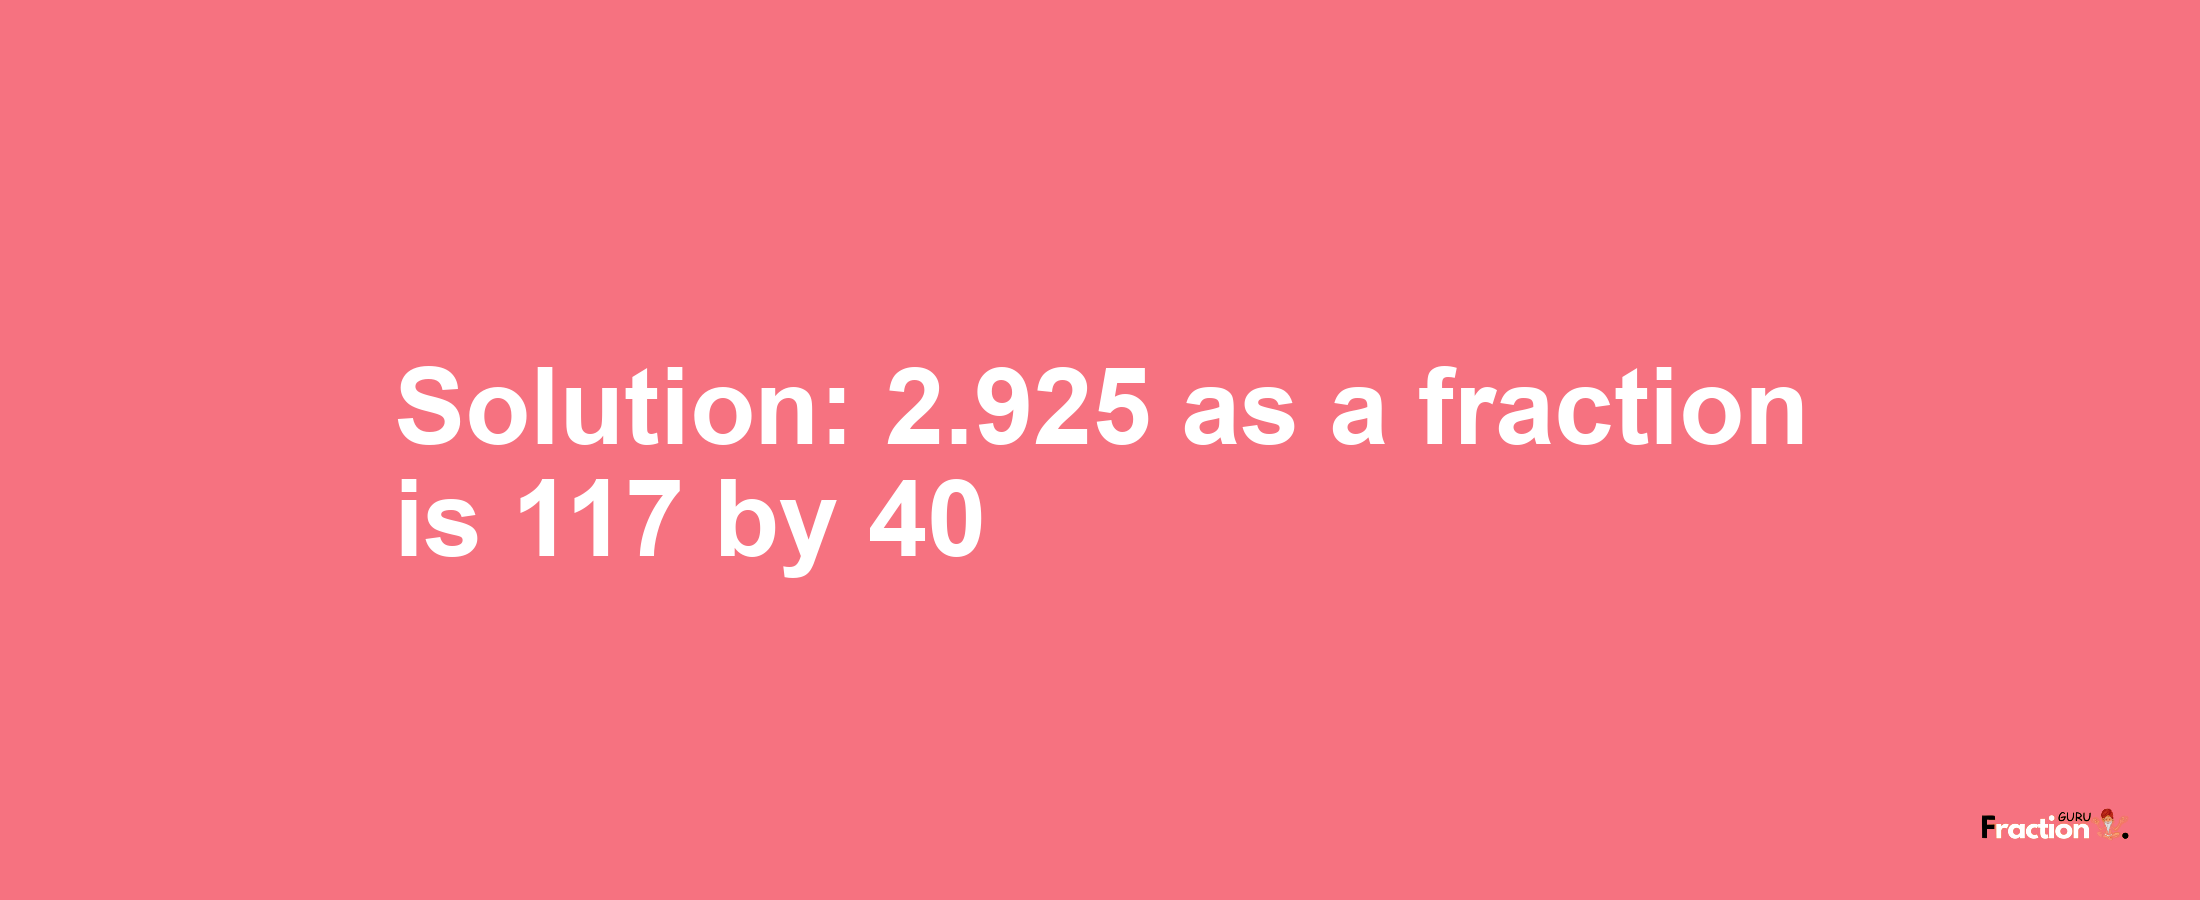 Solution:2.925 as a fraction is 117/40